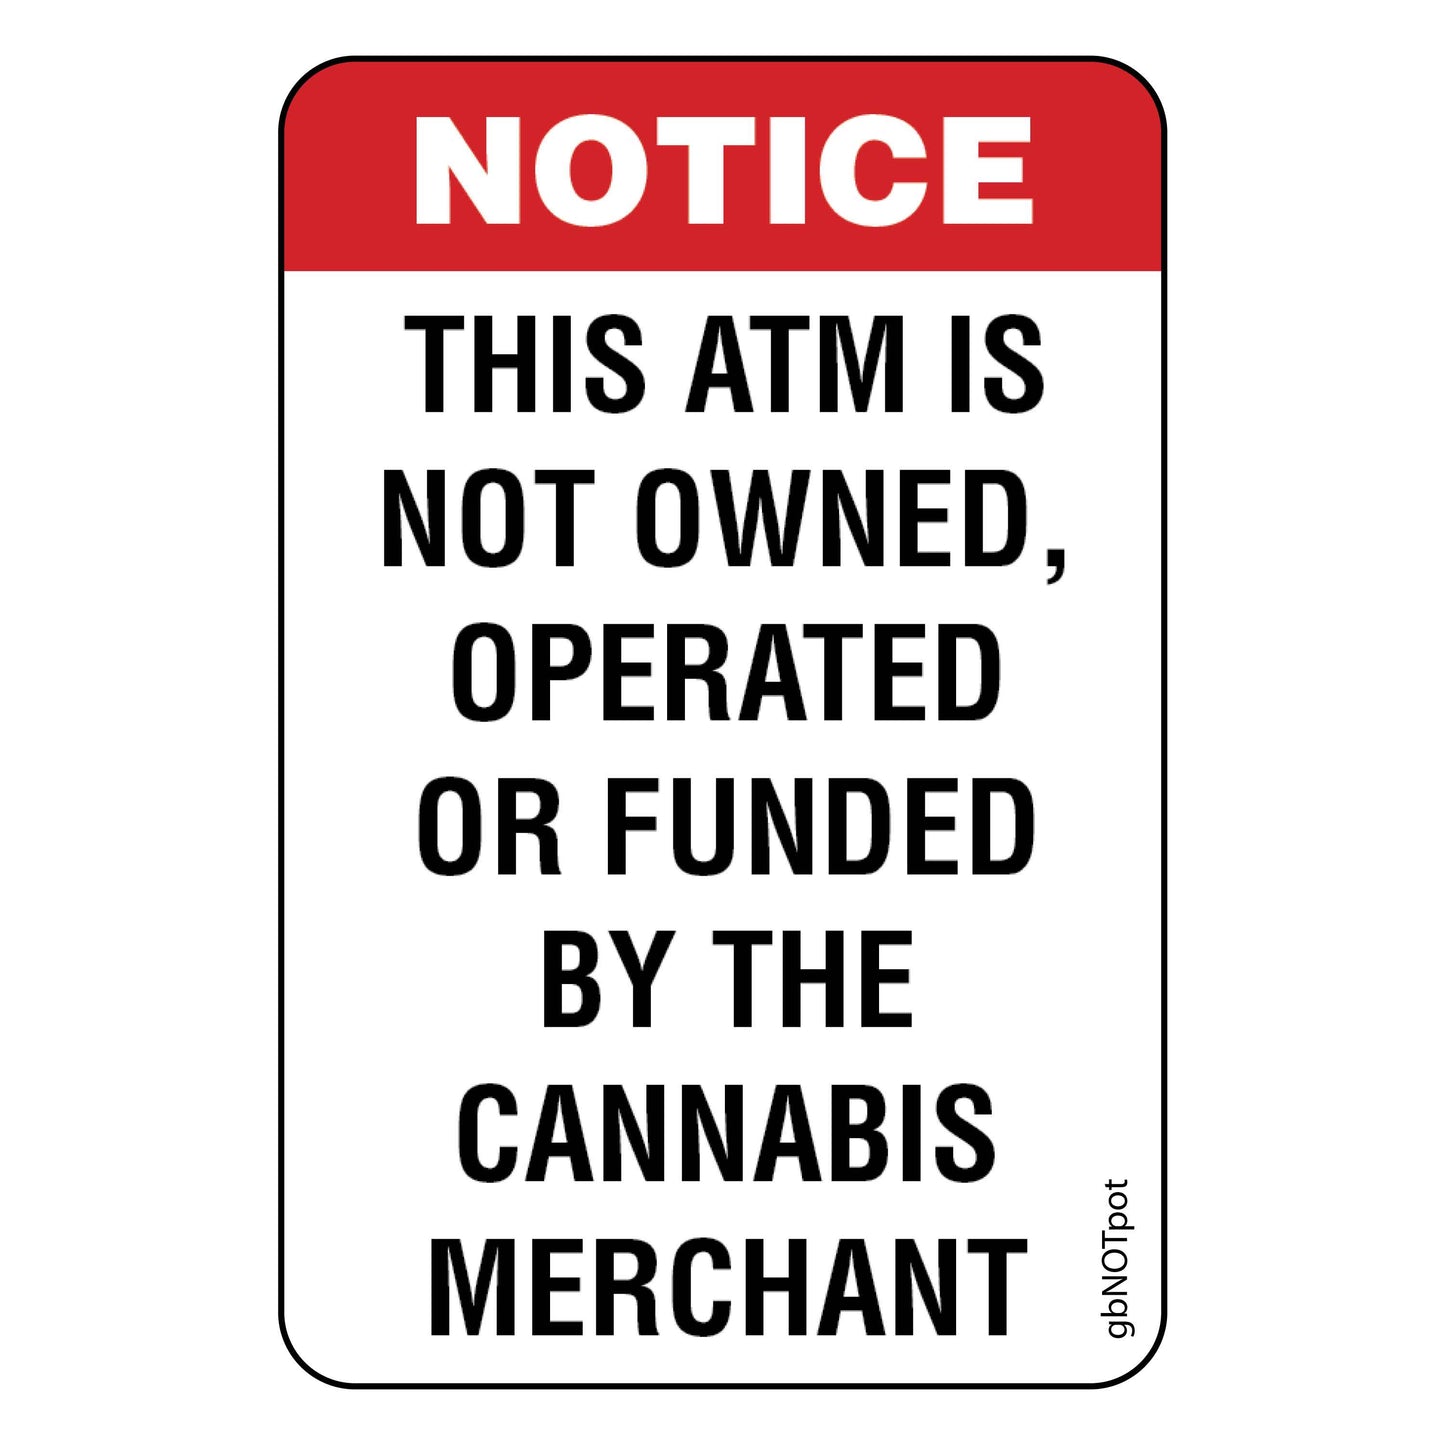 ATM Not Owned by Cannabis Merchant Decal. 2 inches by 3 inches in size. 